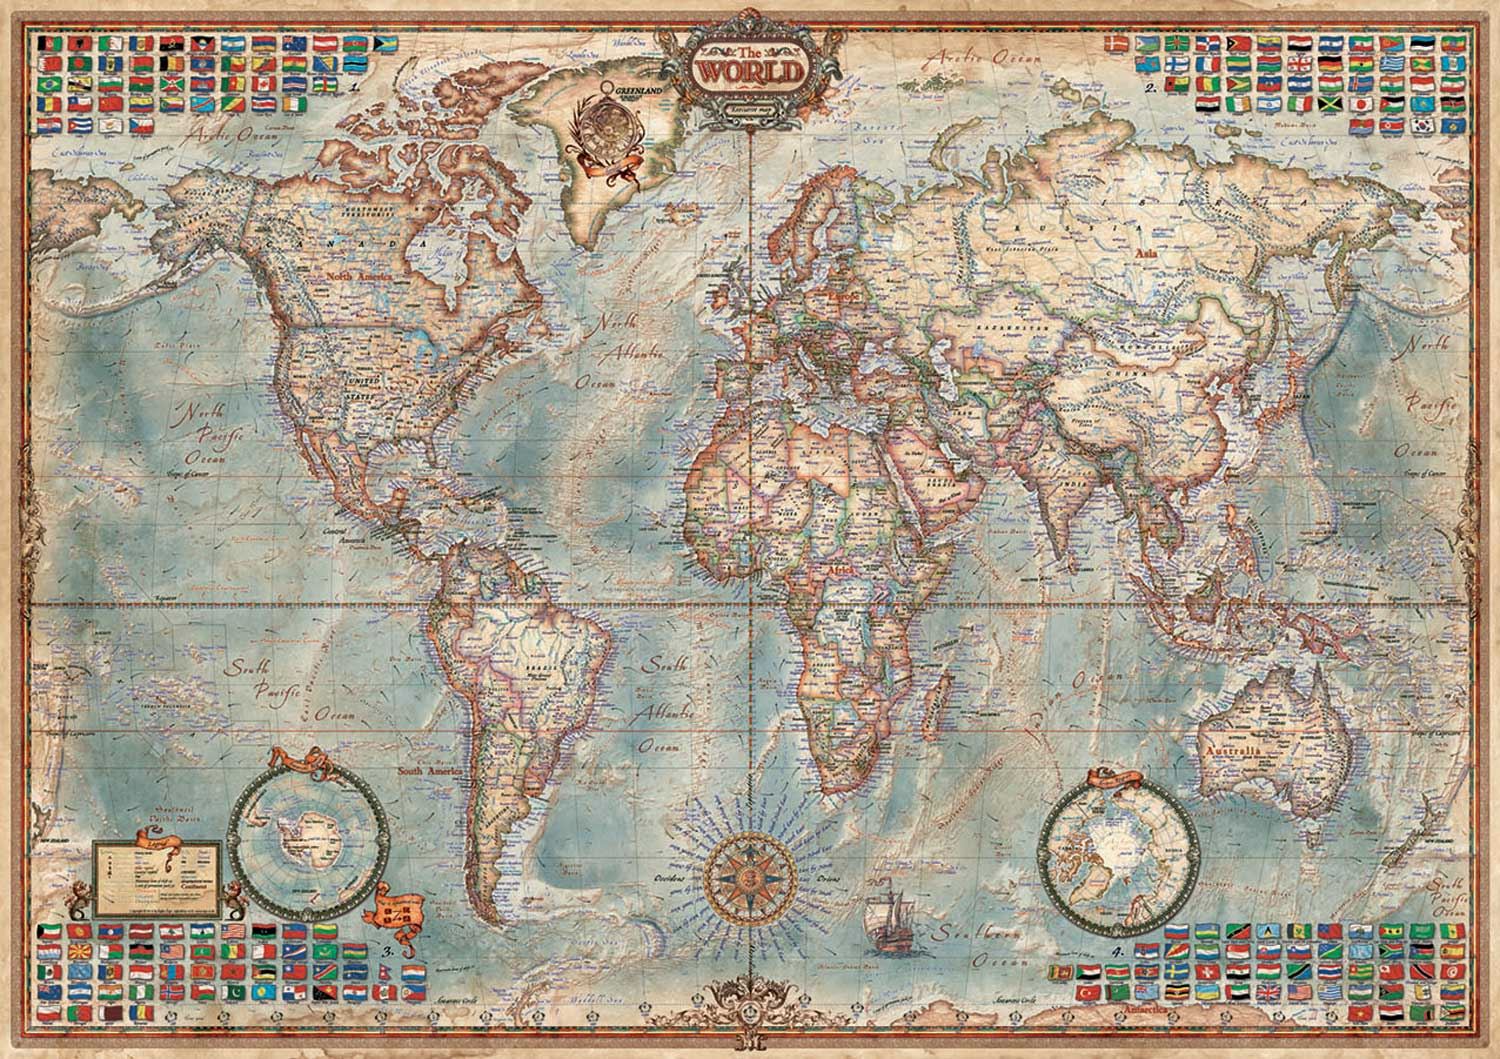 Educa Political Map Of The World Jigsaw Puzzle (1500 Pieces)